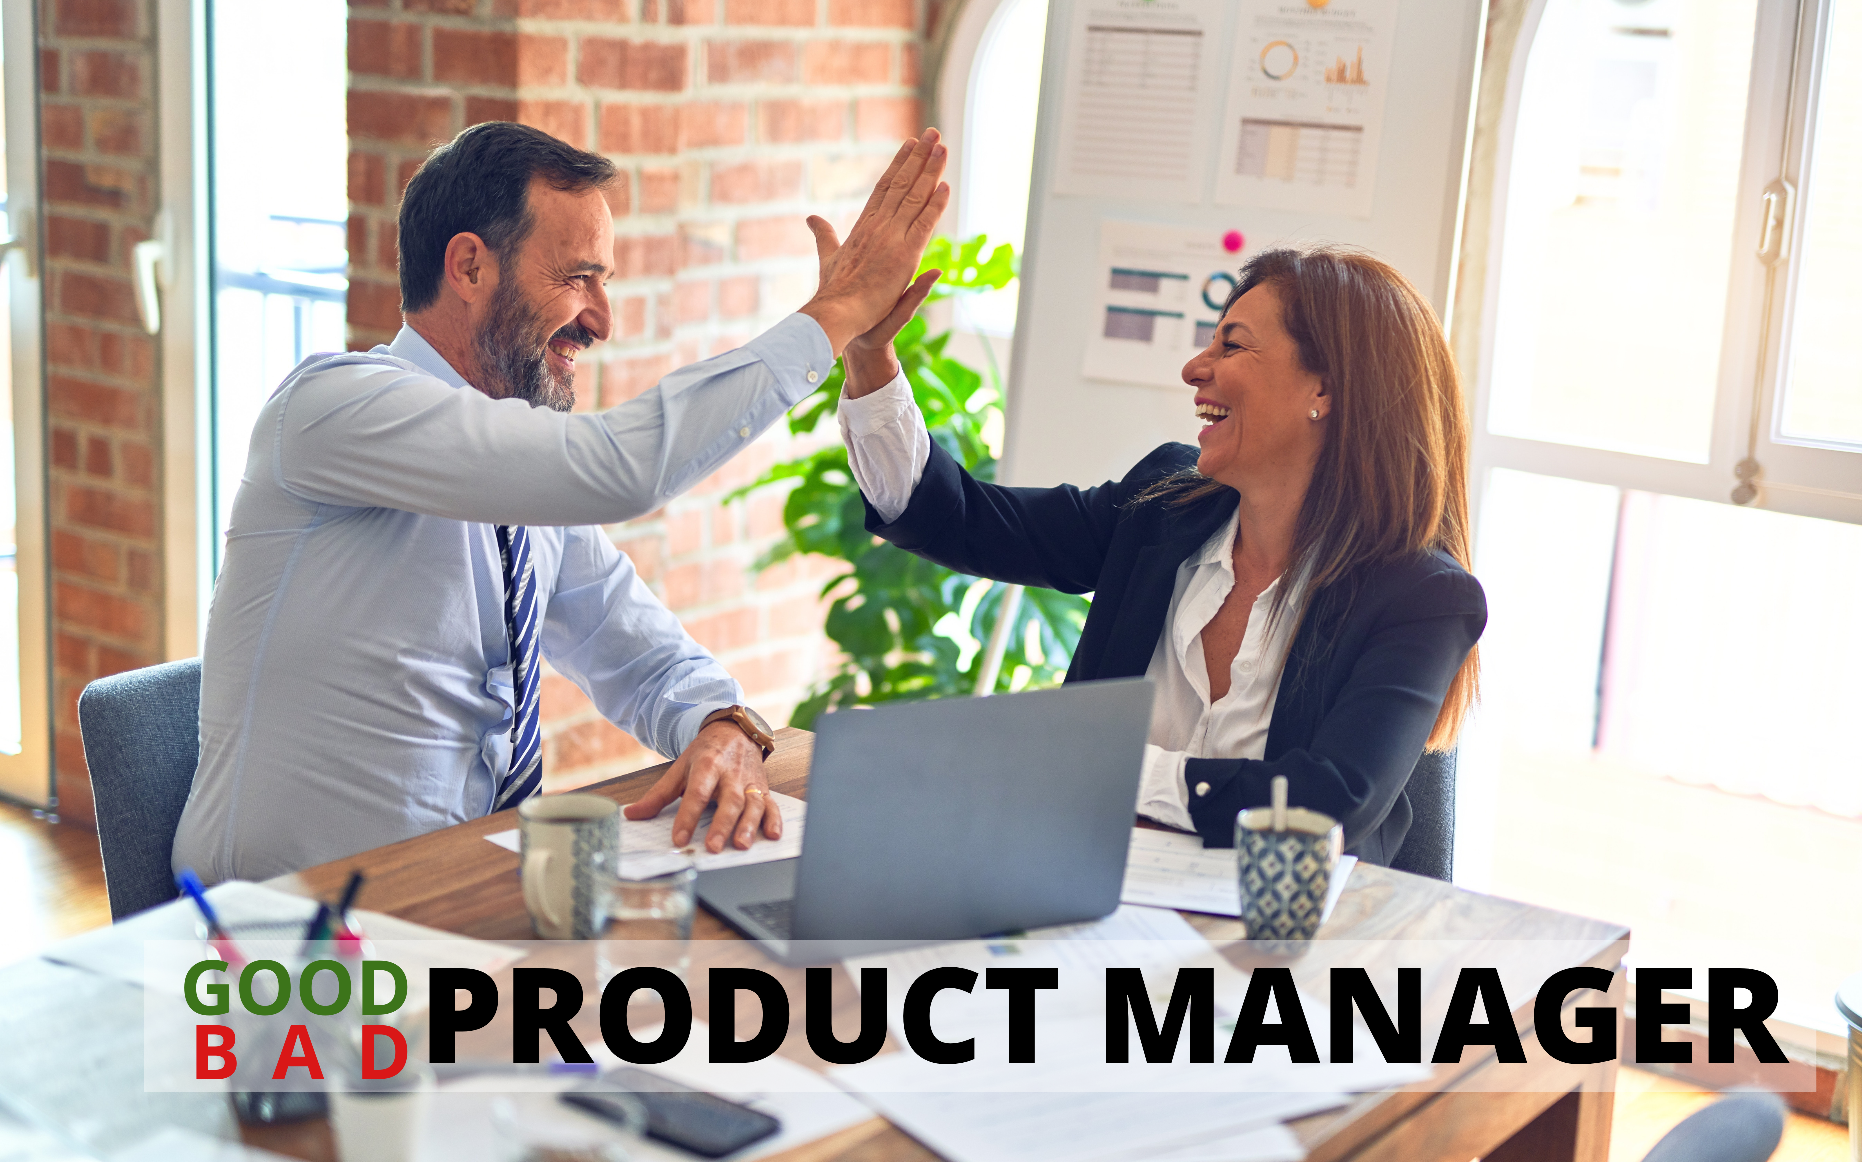 What Defines a Good Product Manager and a Bad Product Manager